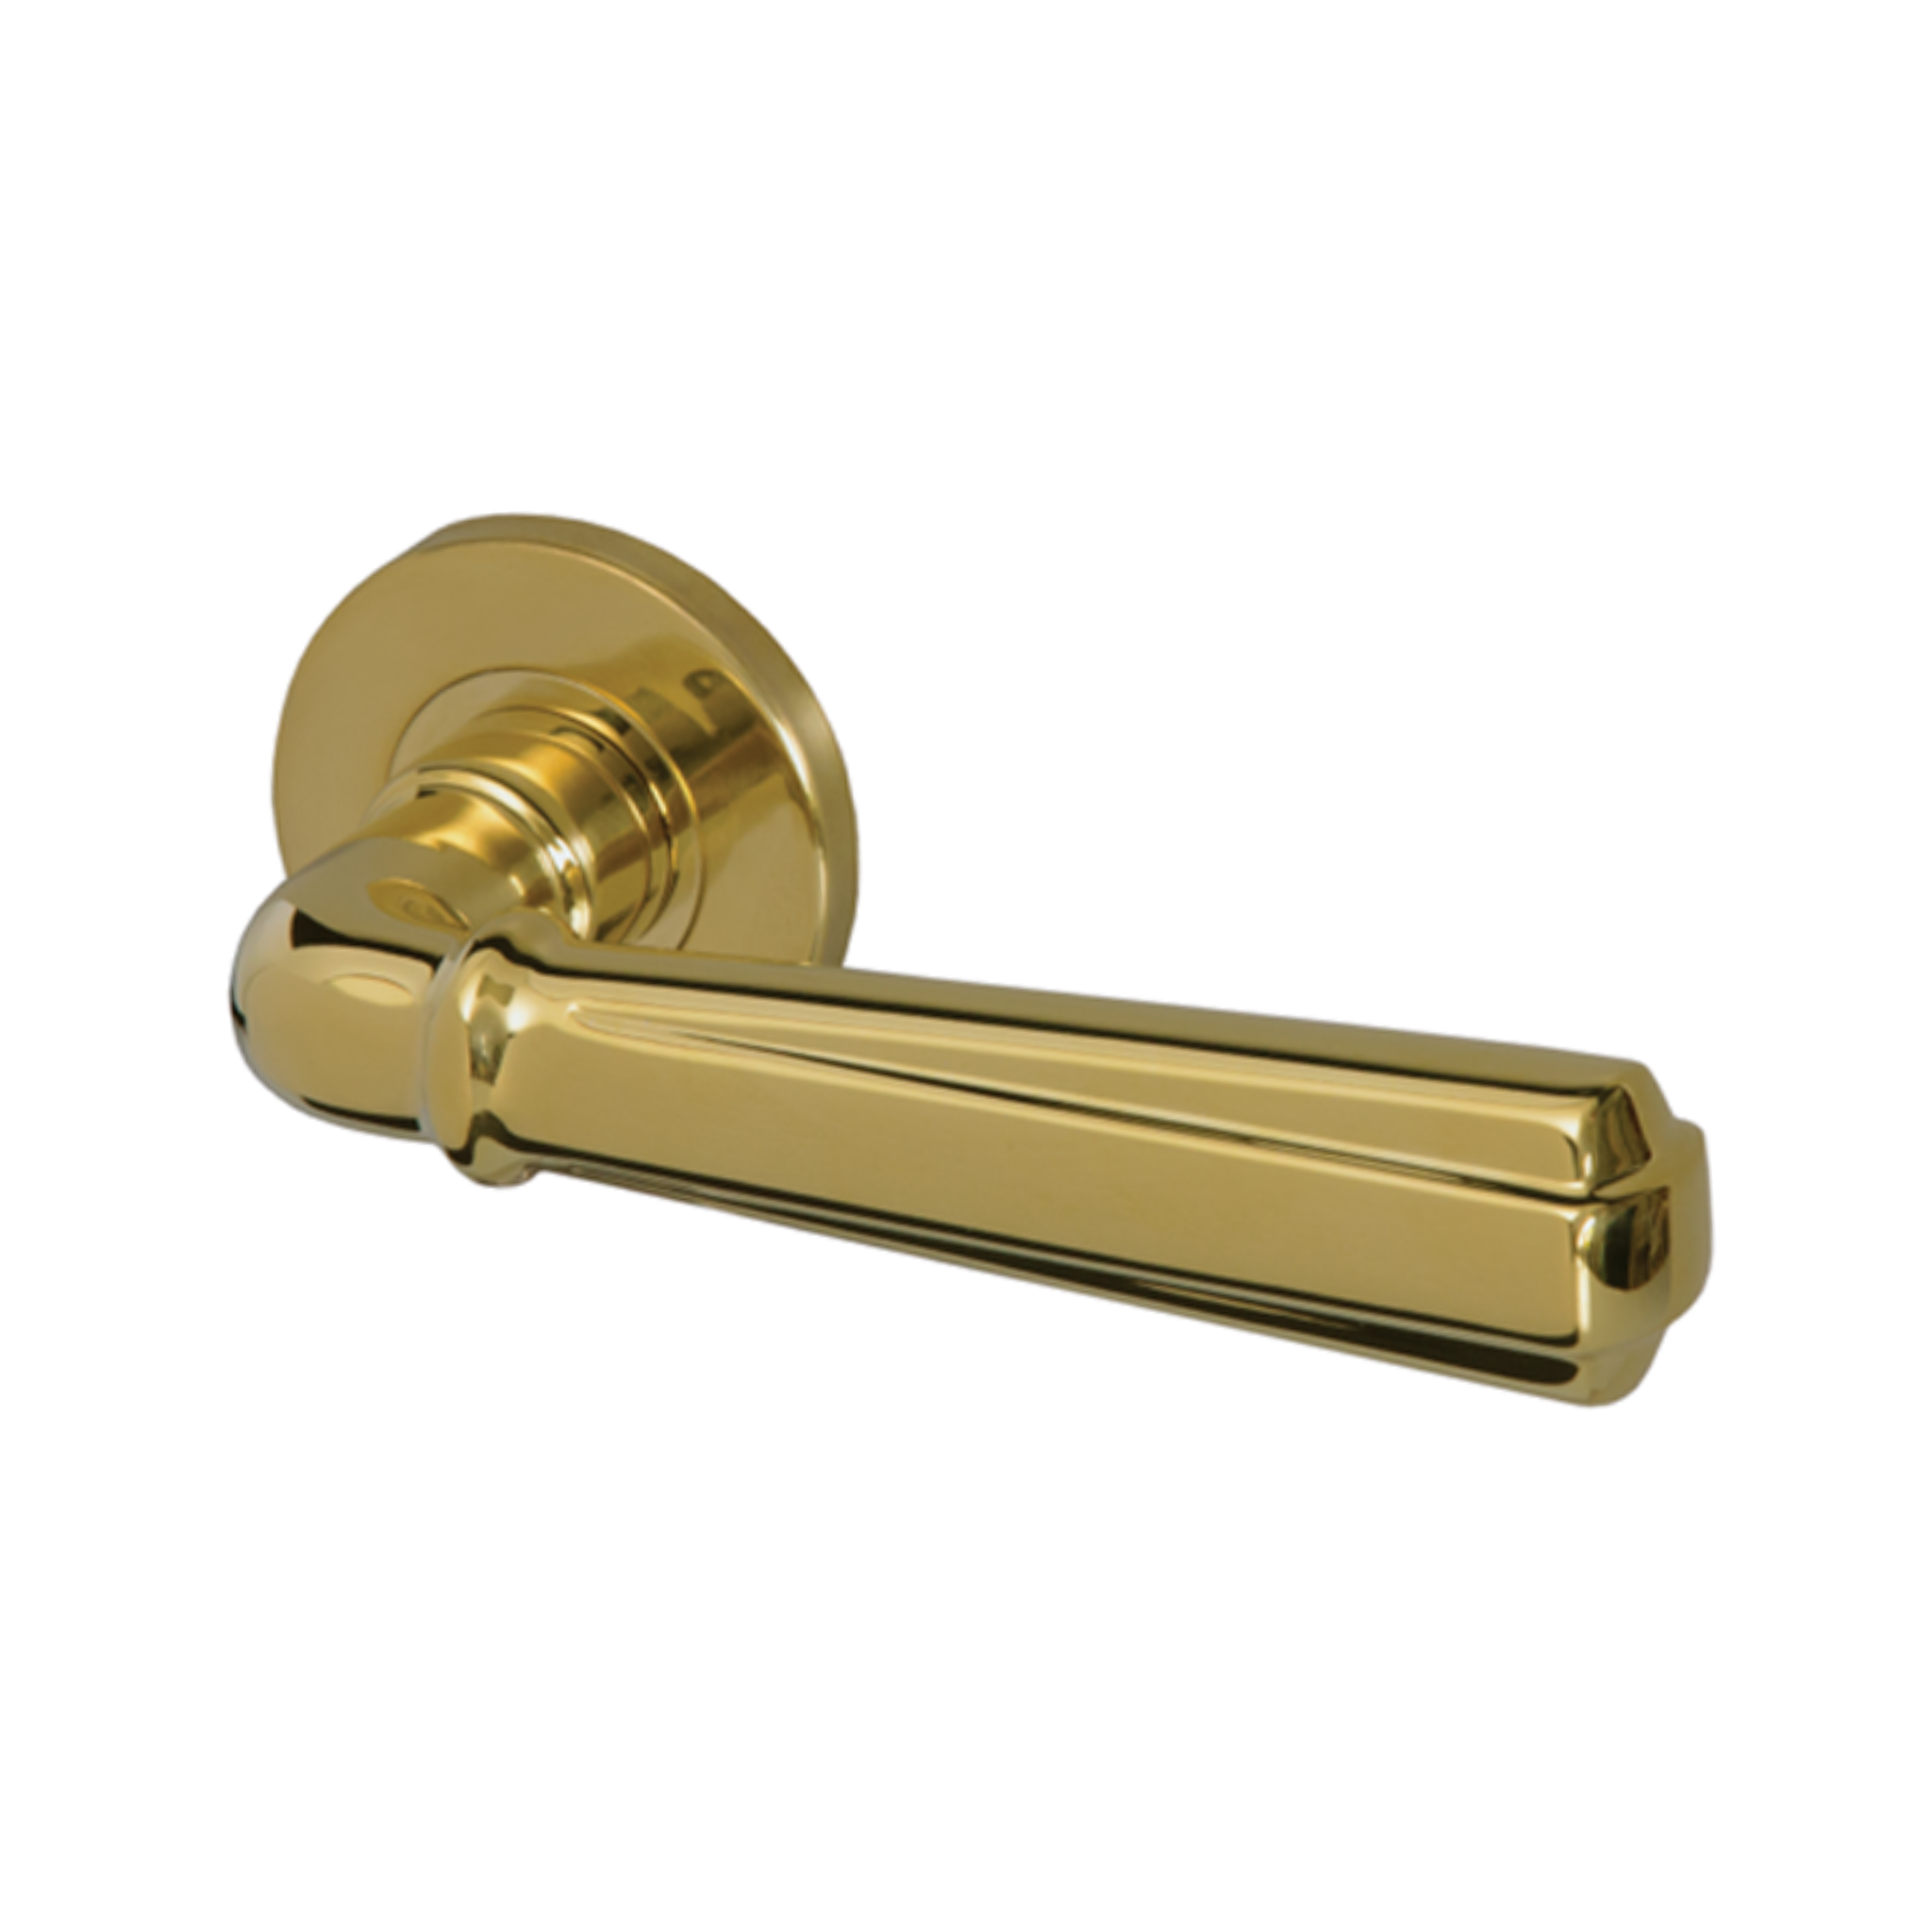 Karis PVD, Lever Handles, Form, On Round Rose, With Escutcheons, PVD Brass, QS